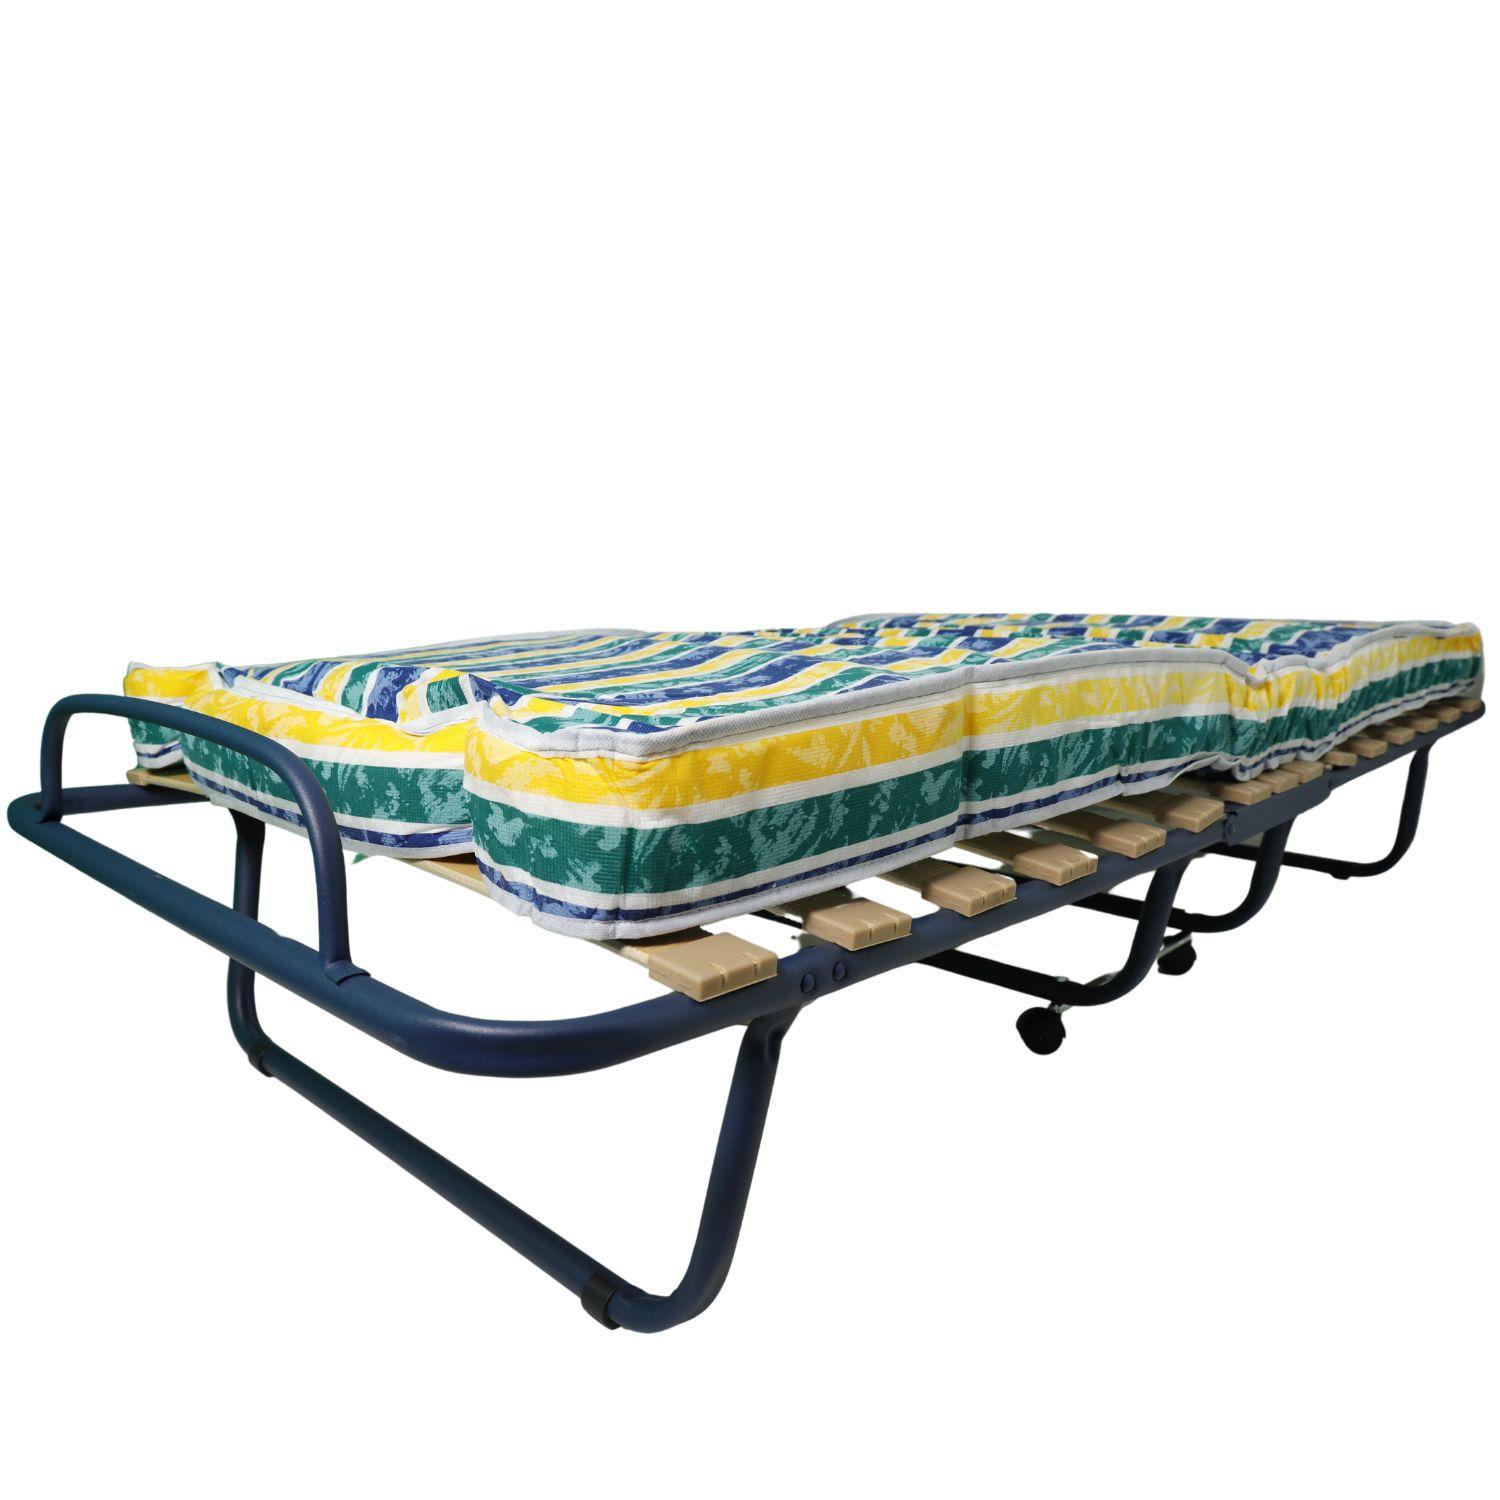 Foldable Bed with Wheels ARDIS 190 x 80 cm